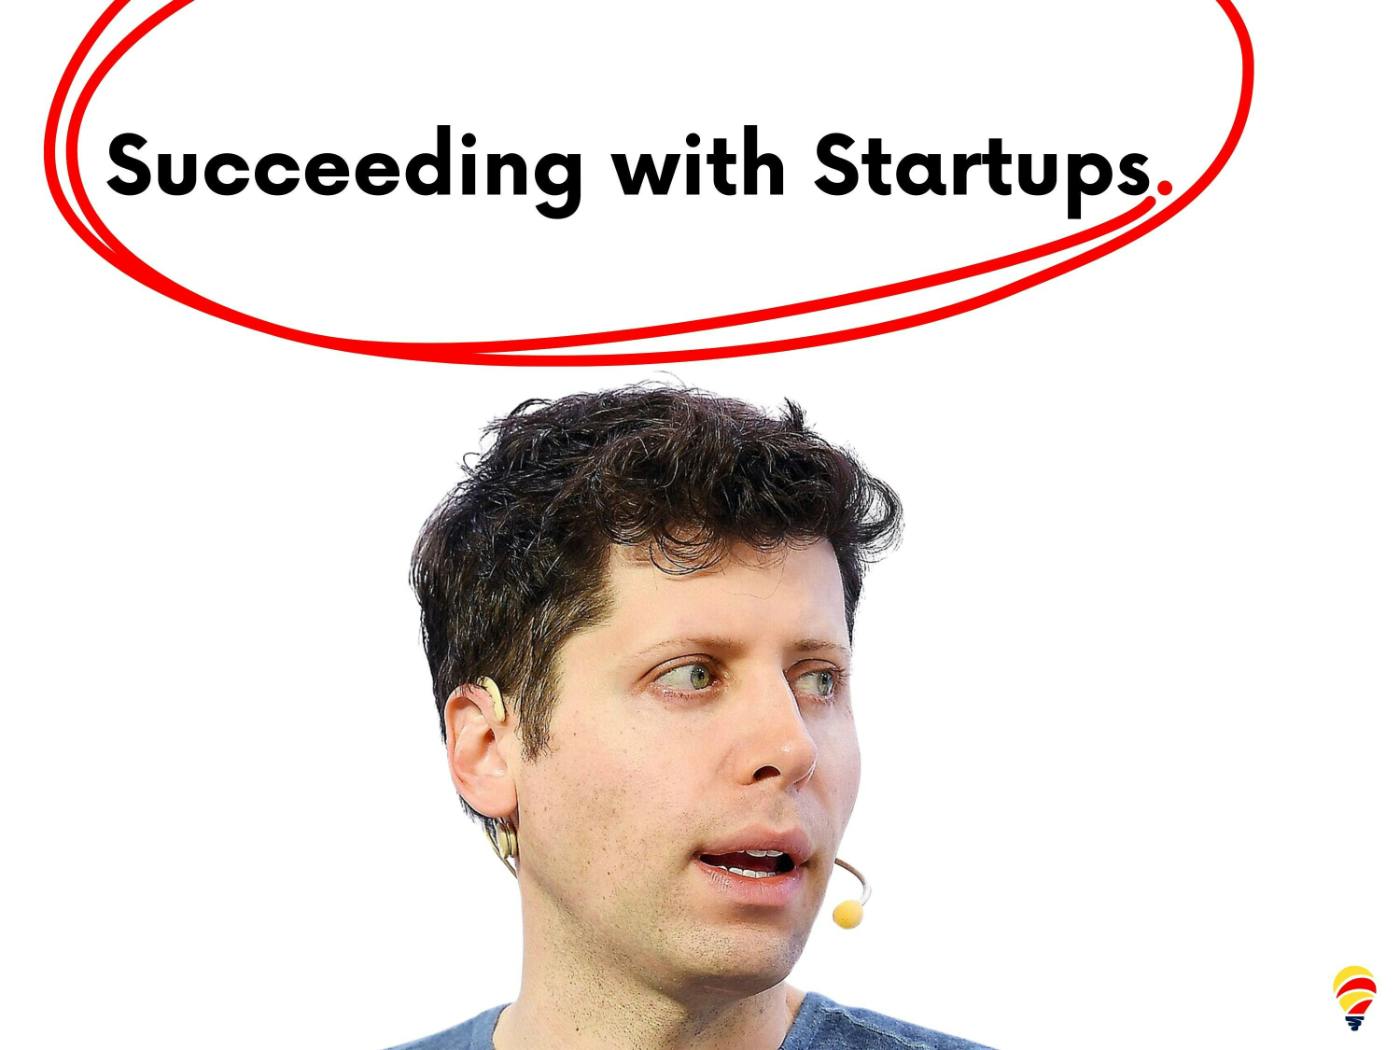 /how-to-succeed-with-startups-a-guide-for-product-leaders-inspired-by-sam-altman feature image